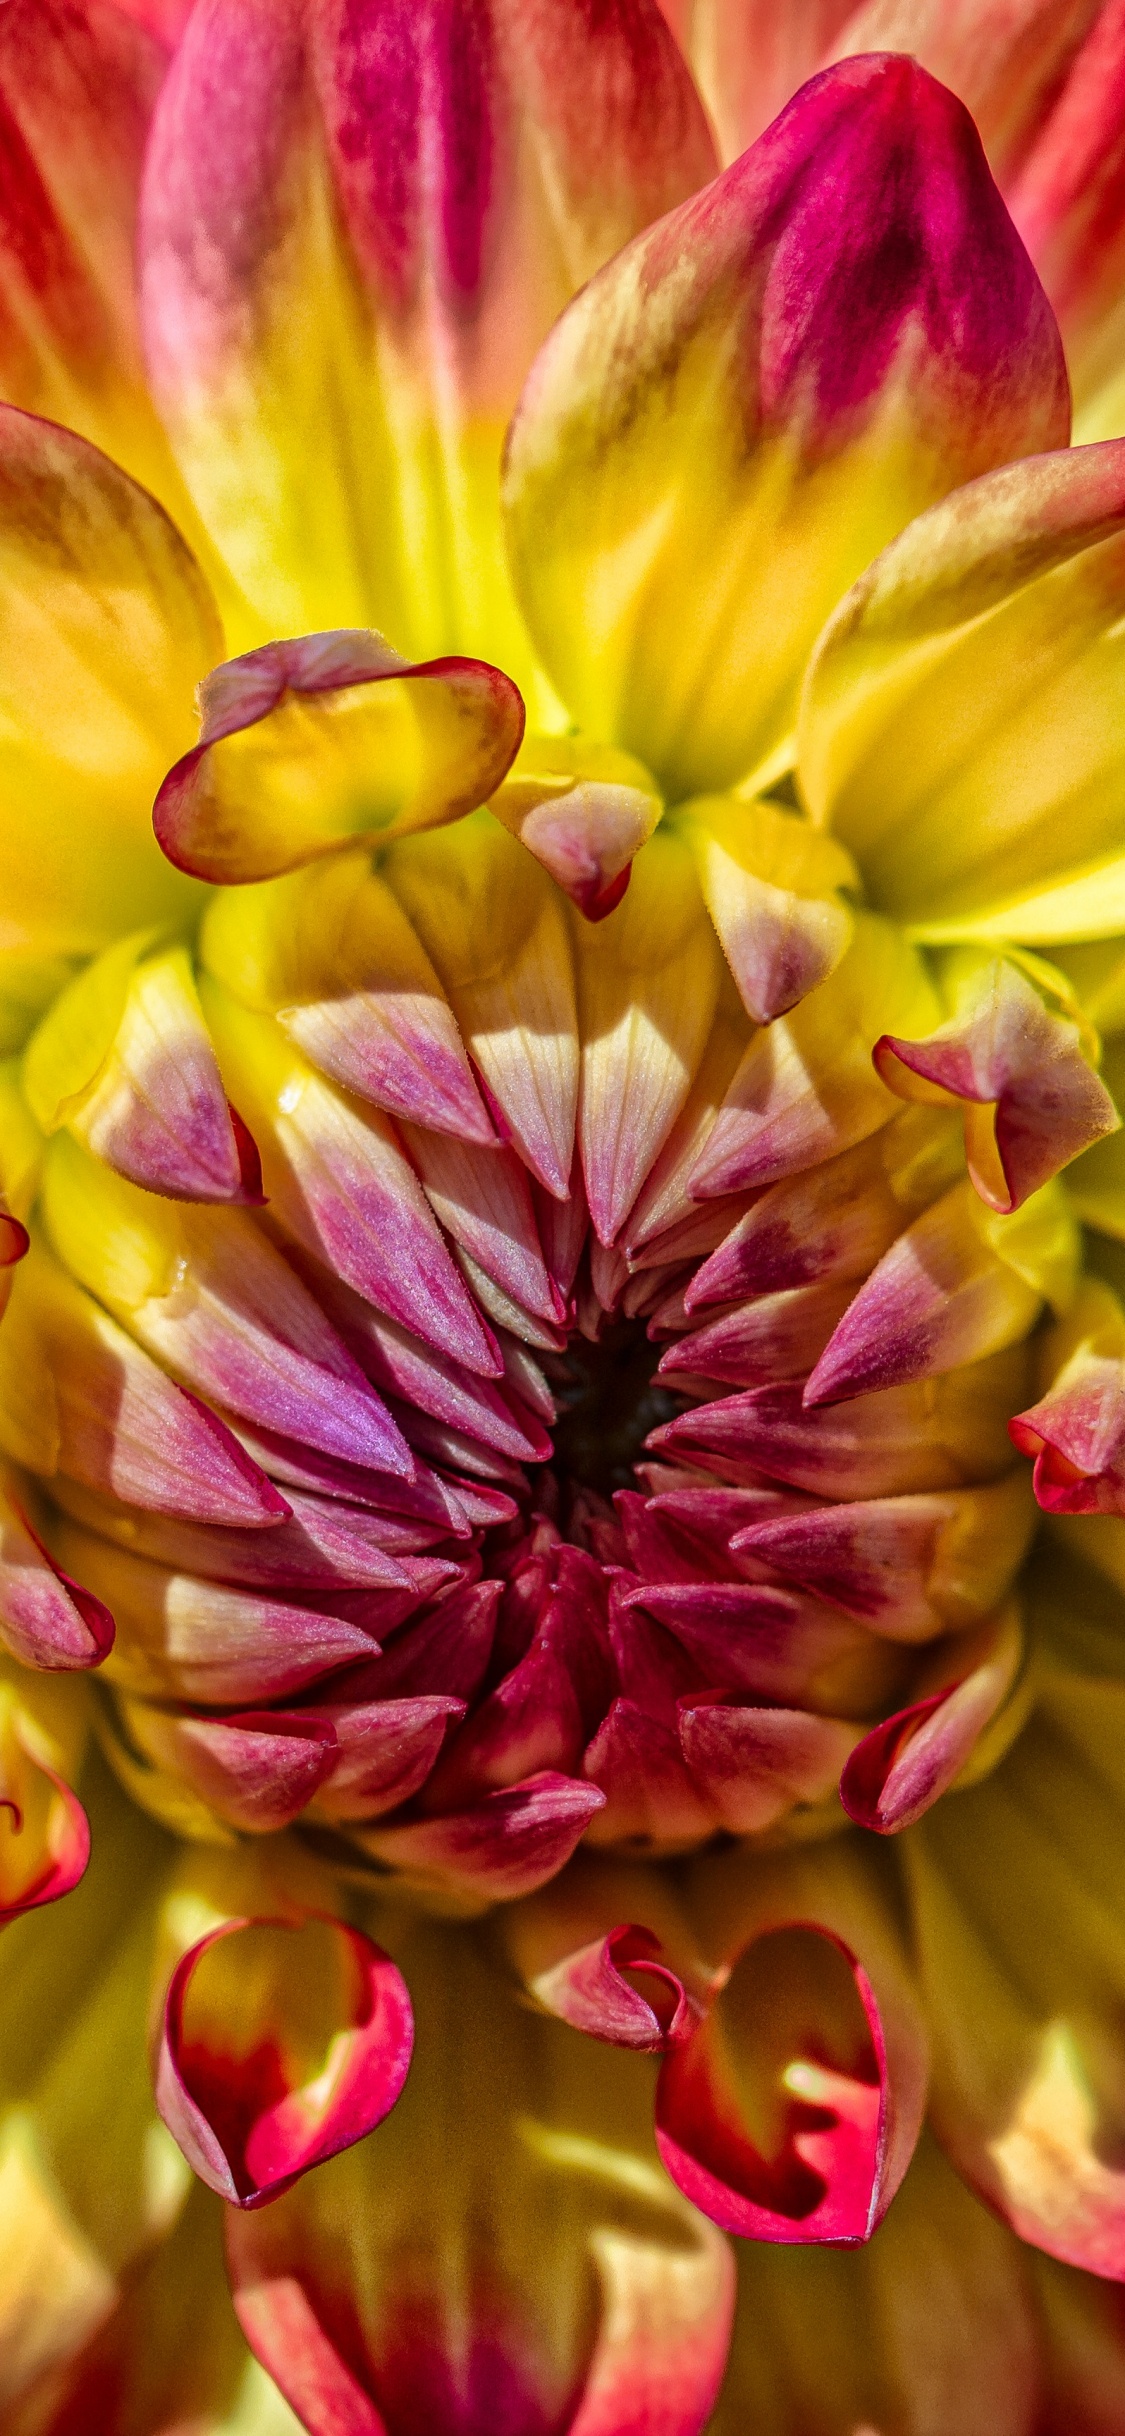 Pink and Yellow Flower in Macro Photography. Wallpaper in 1125x2436 Resolution